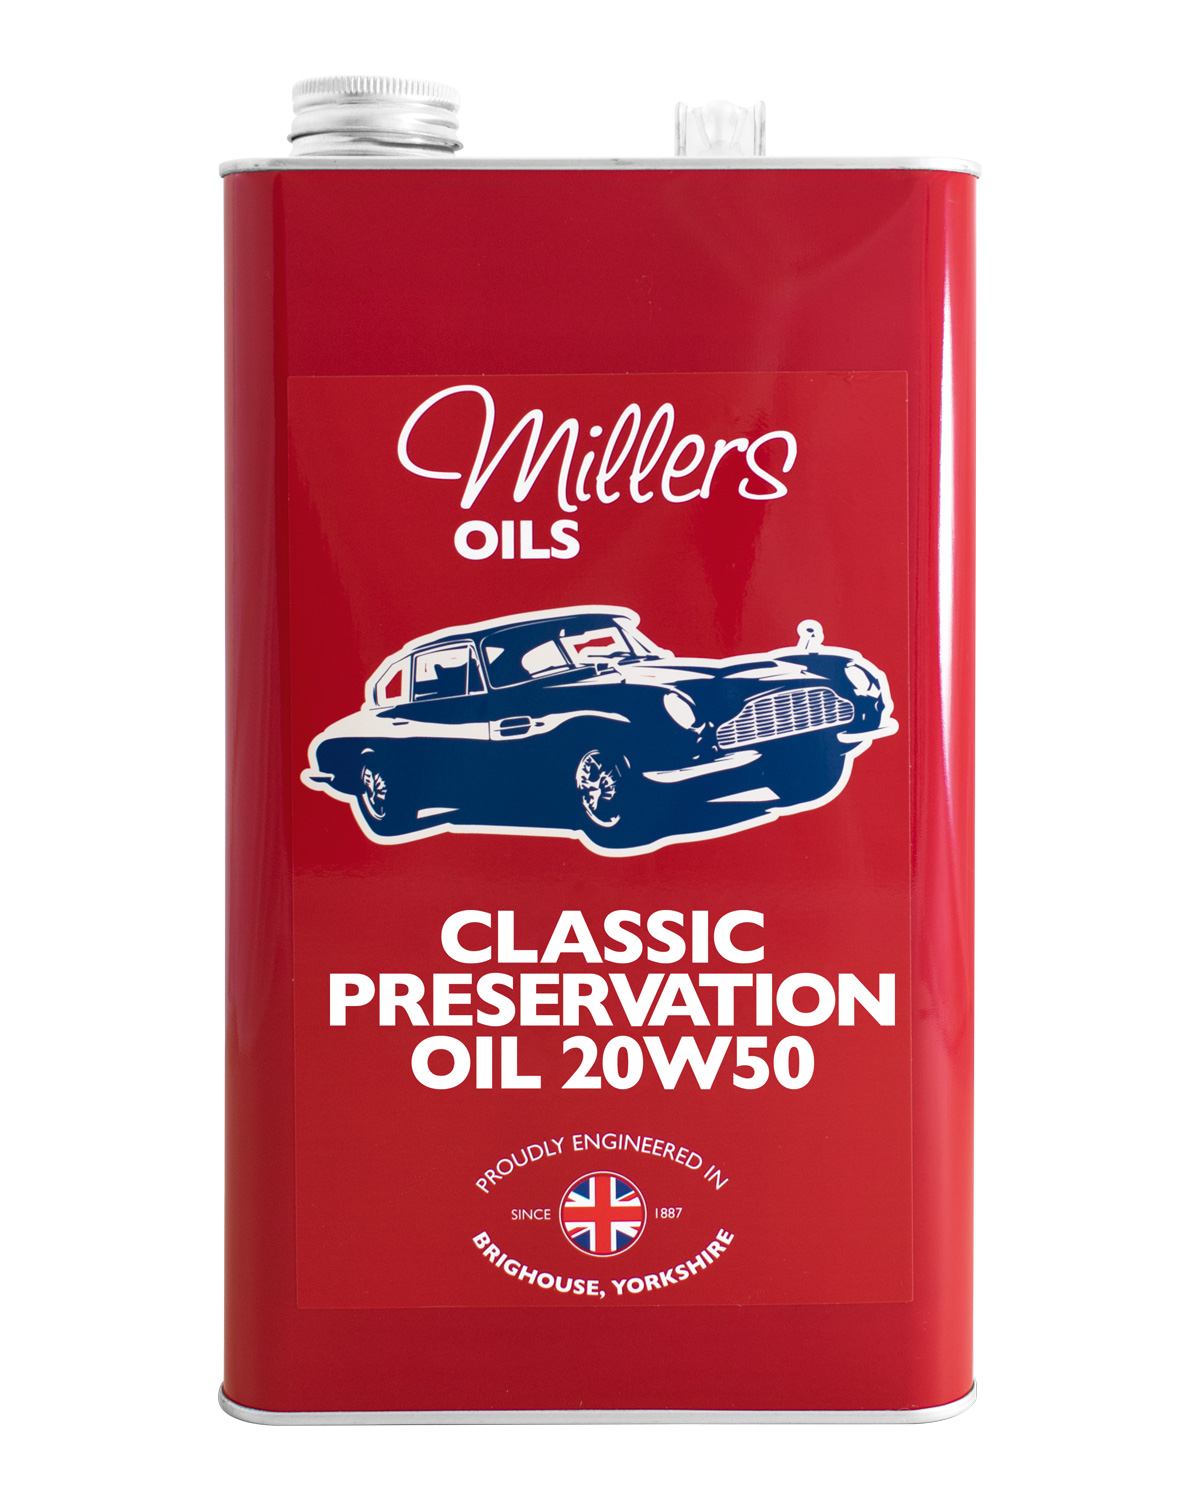 Millers Oils Classic Preservation Oil 20W-50, 5 Liter